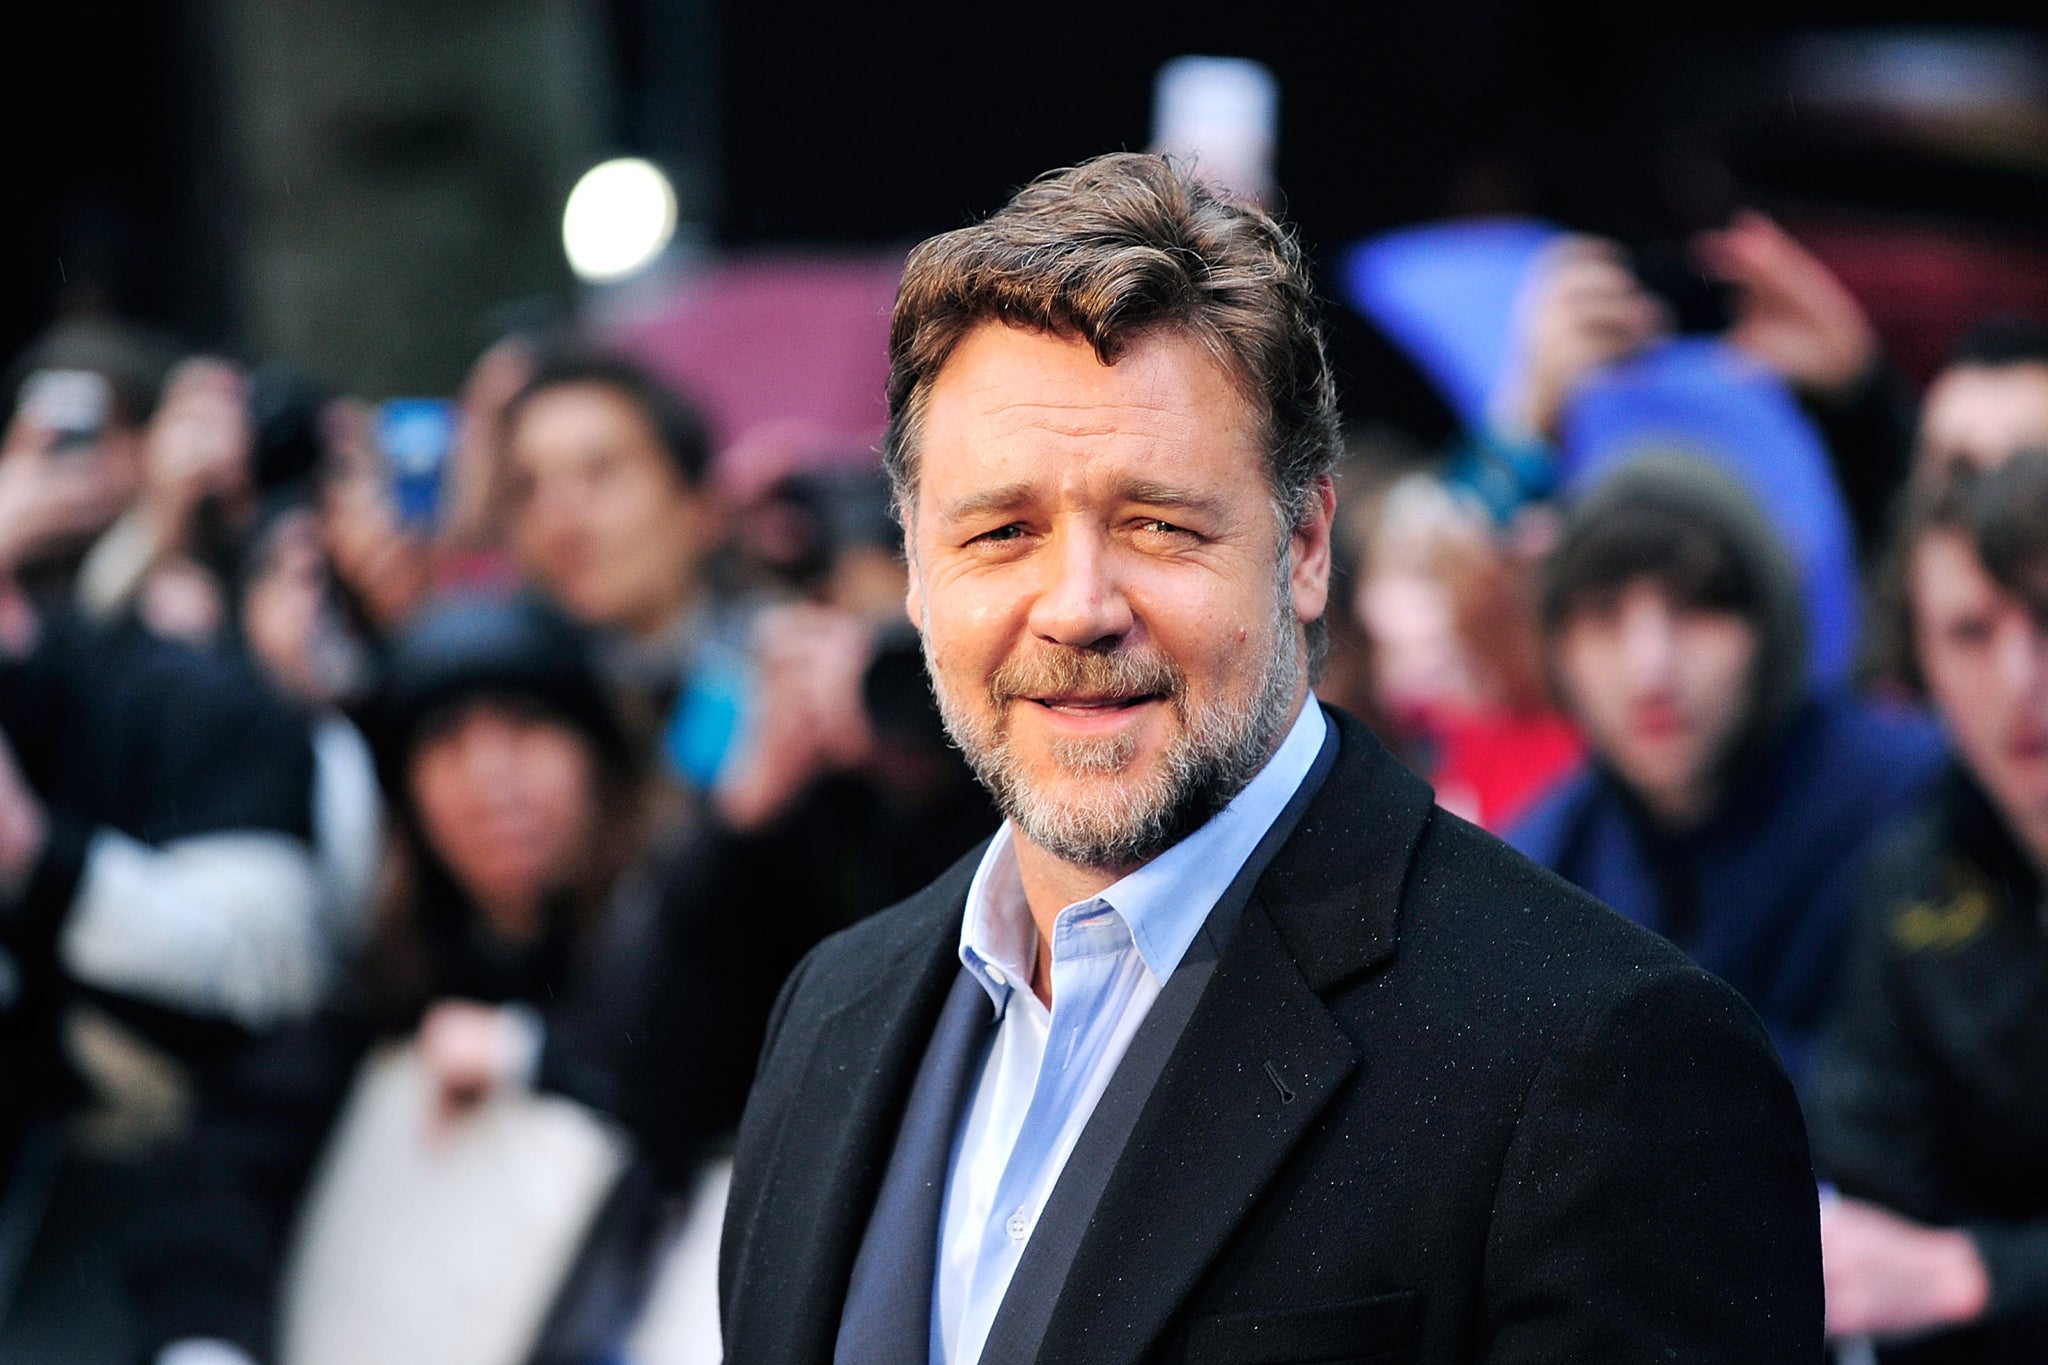 Russell Crowe attends the UK Premiere of 'Man of Steel' at Odeon Leicester Square on June 12, 2013 in London